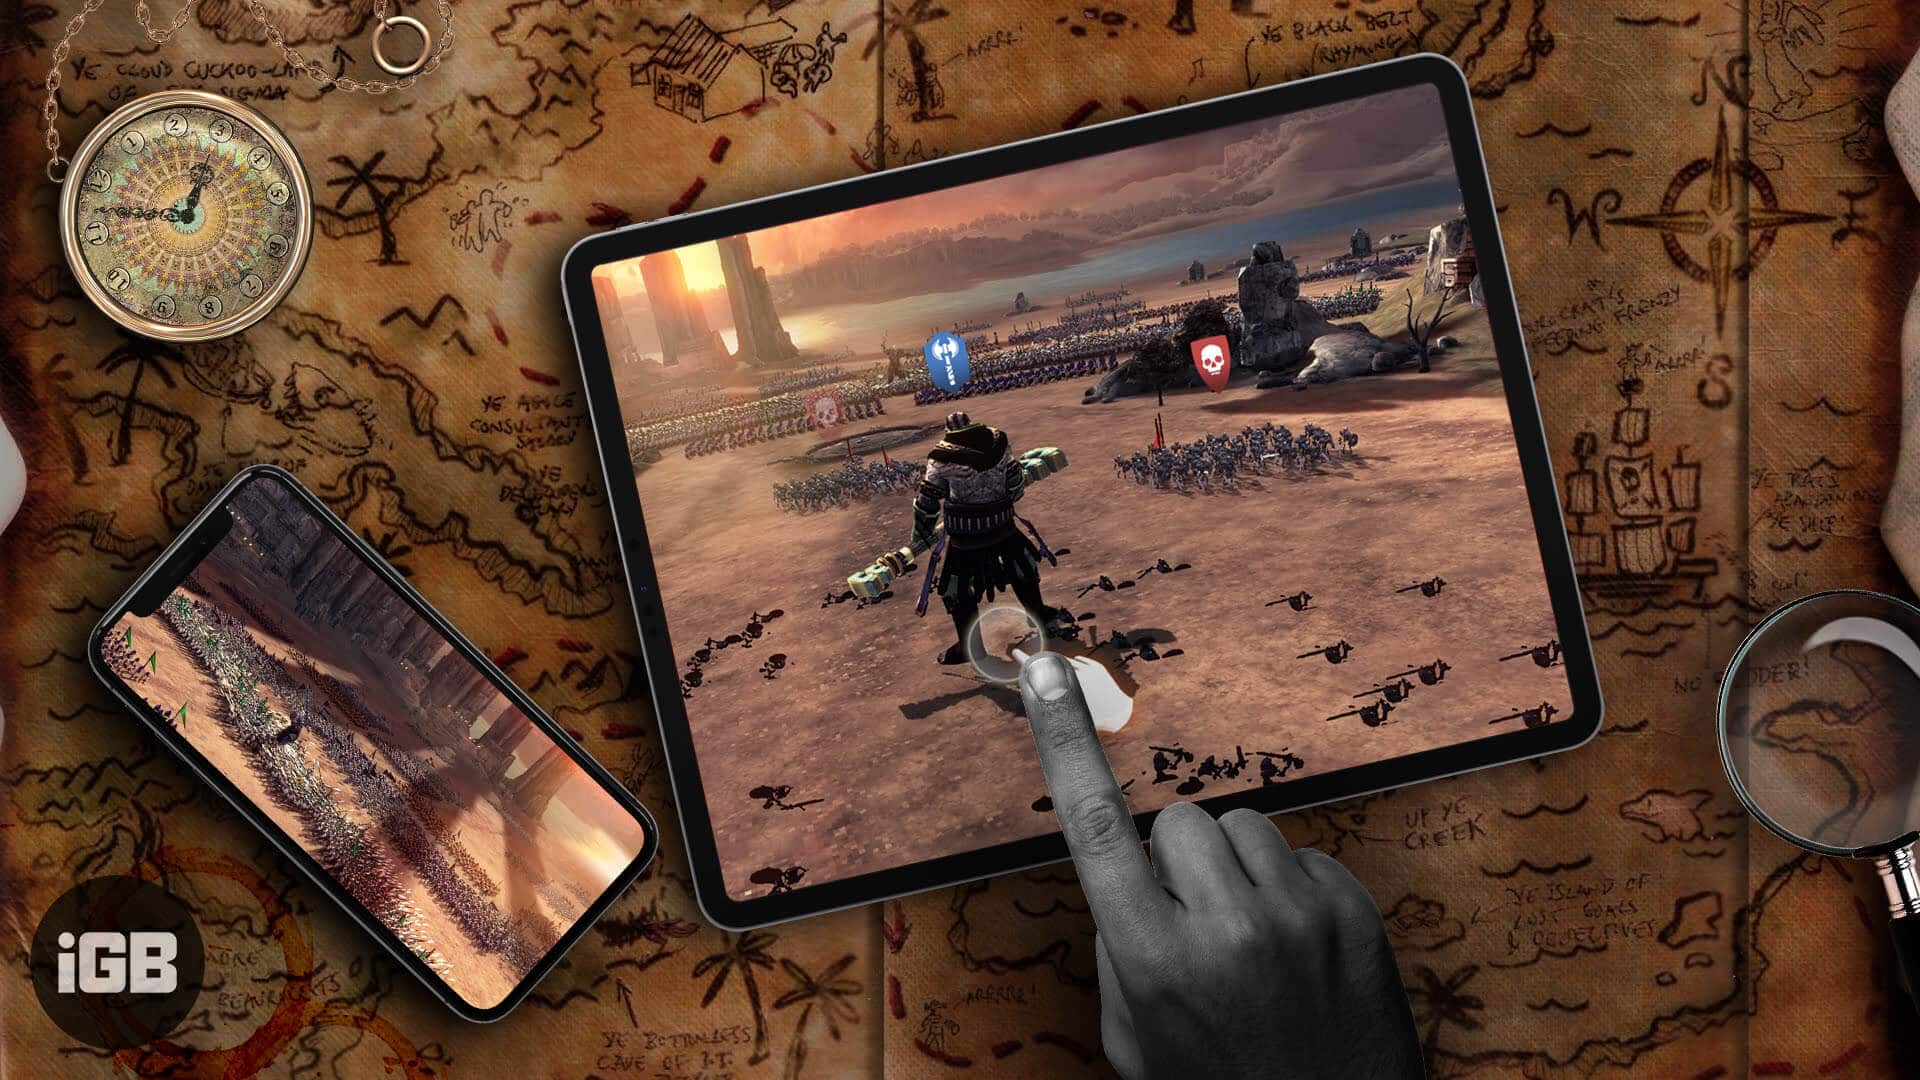 Best mmorpg games for iphone ipad